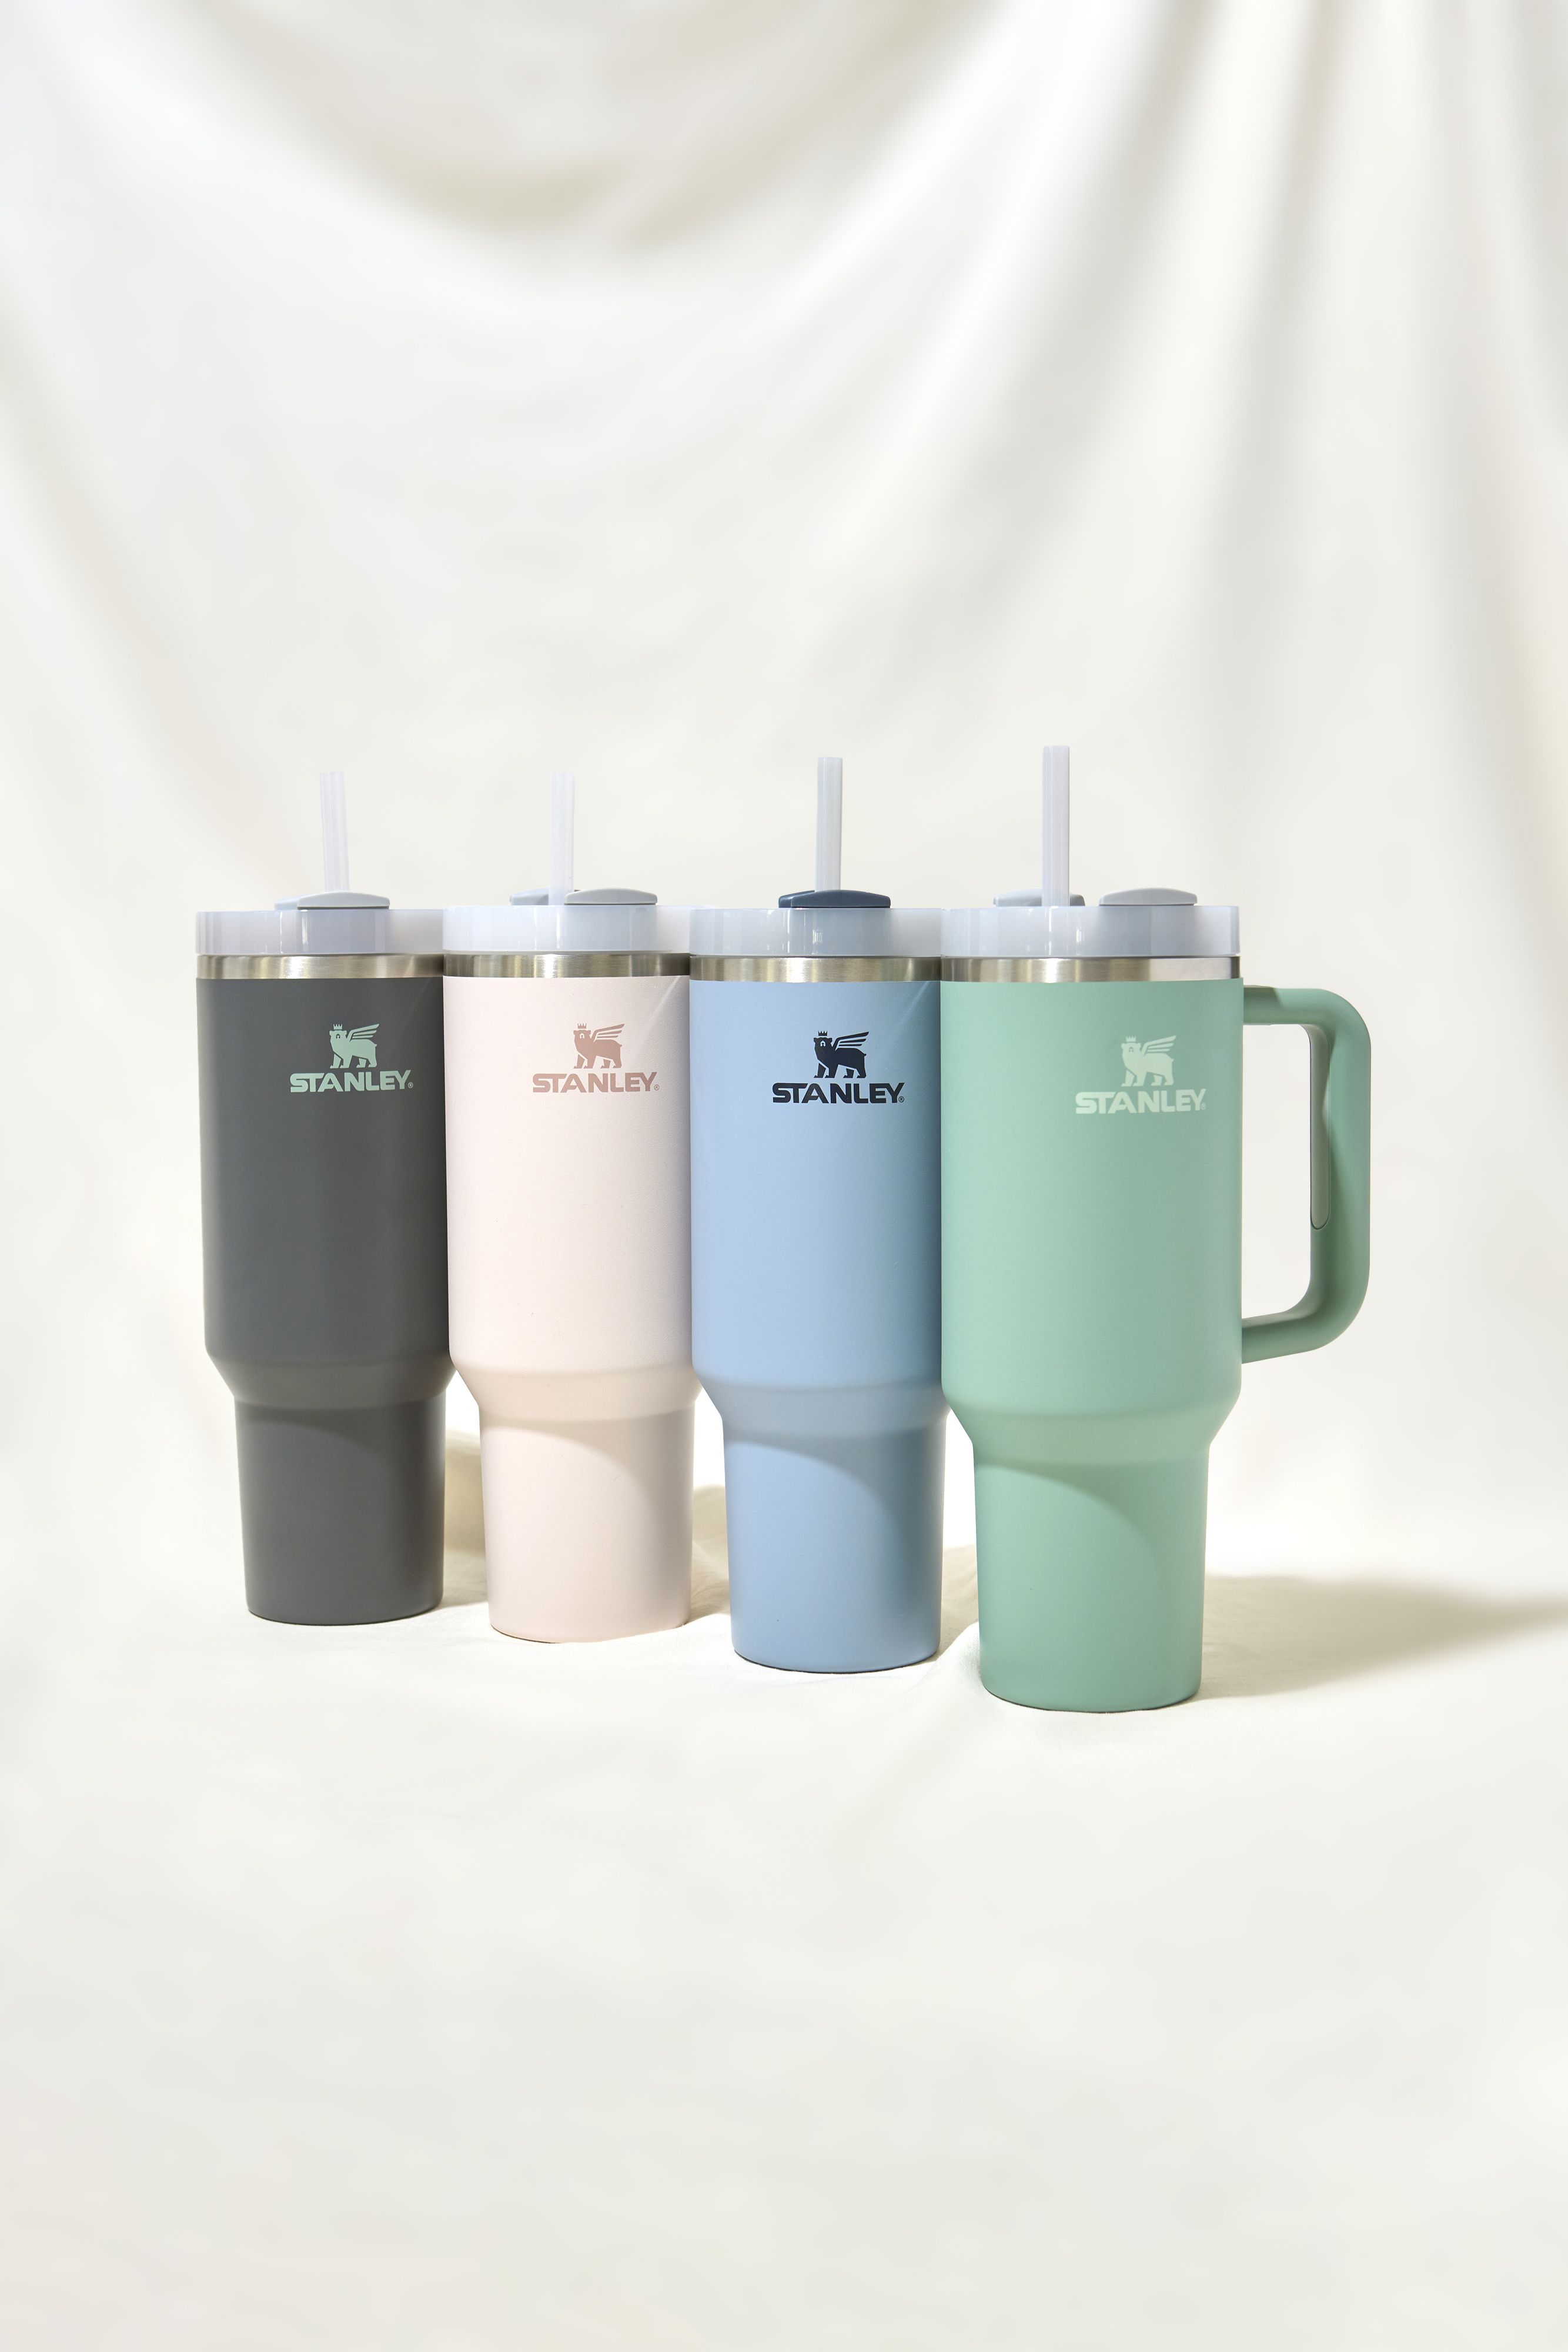 Stanley Quencher cup UK release date, RRP, colours, where to buy